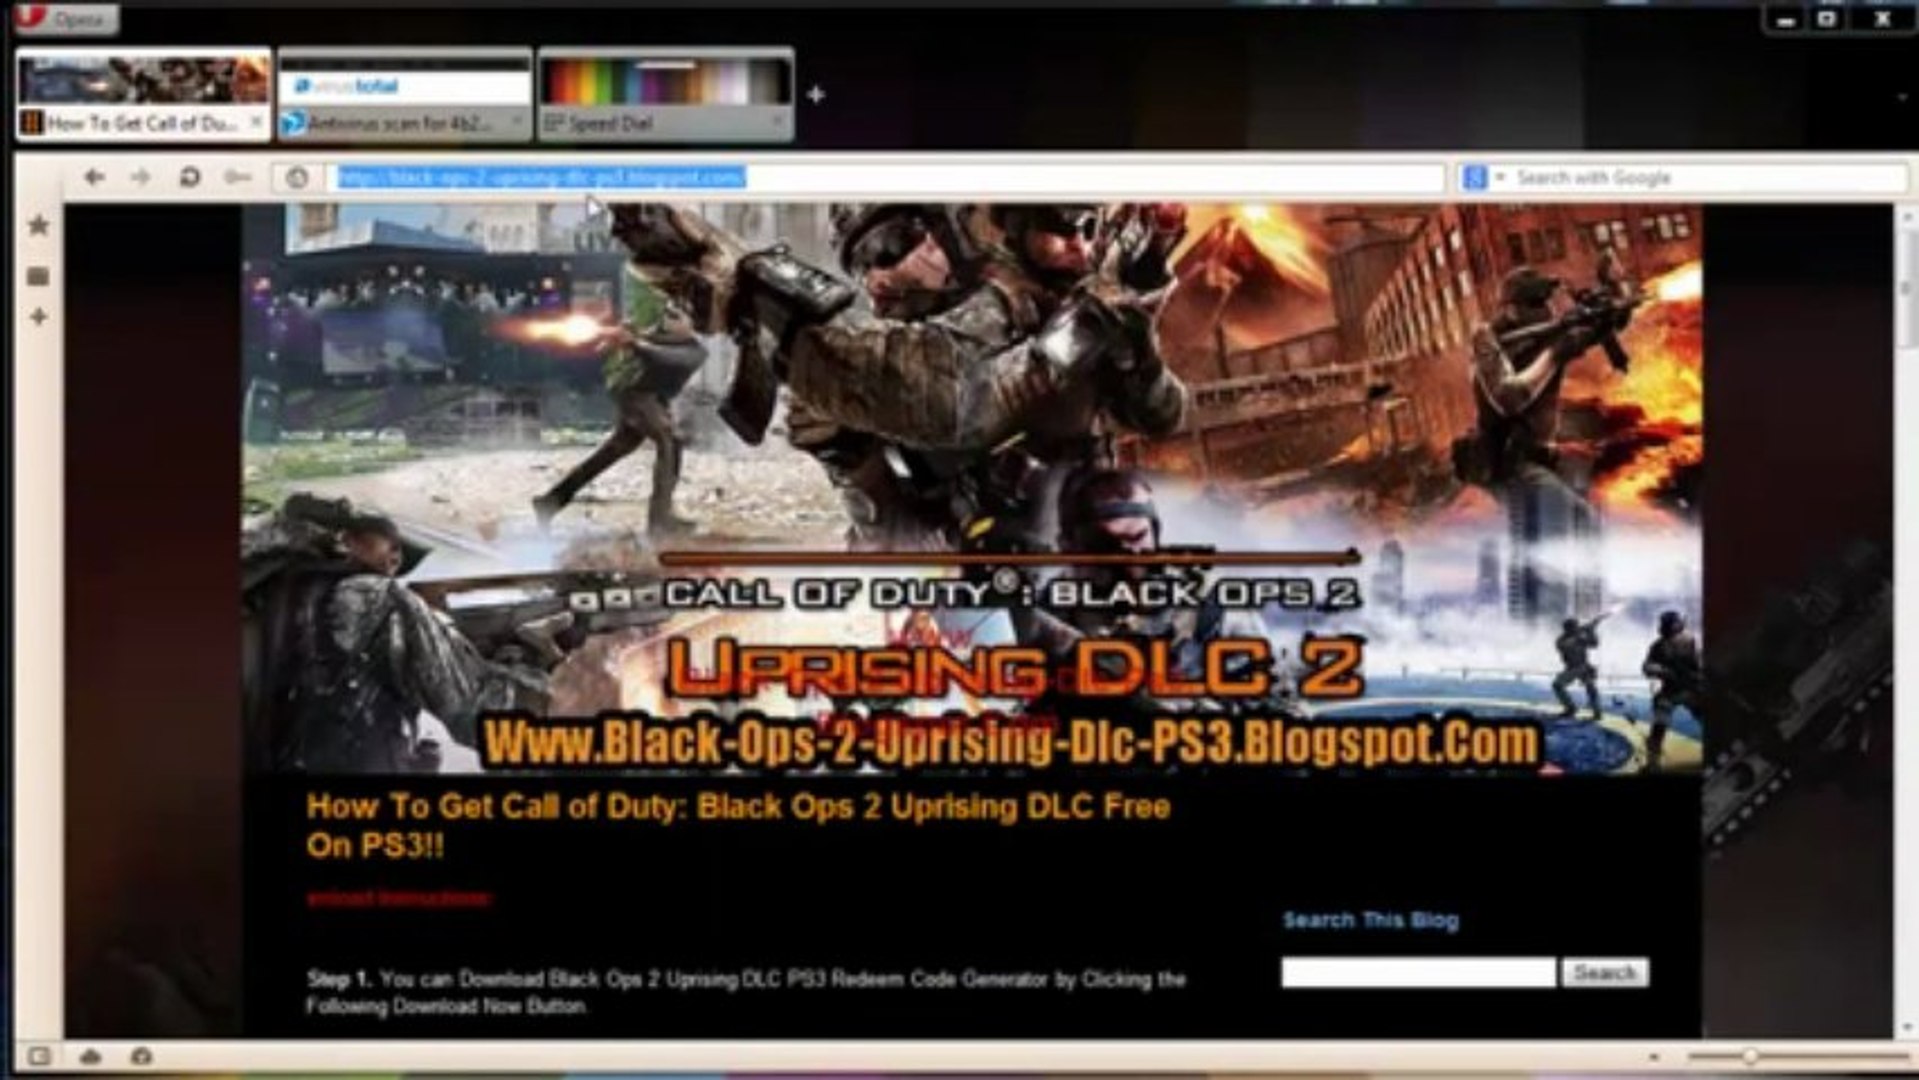 Black Ops 2 Uprising DLC Ps3 Code [FREE] - video Dailymotion